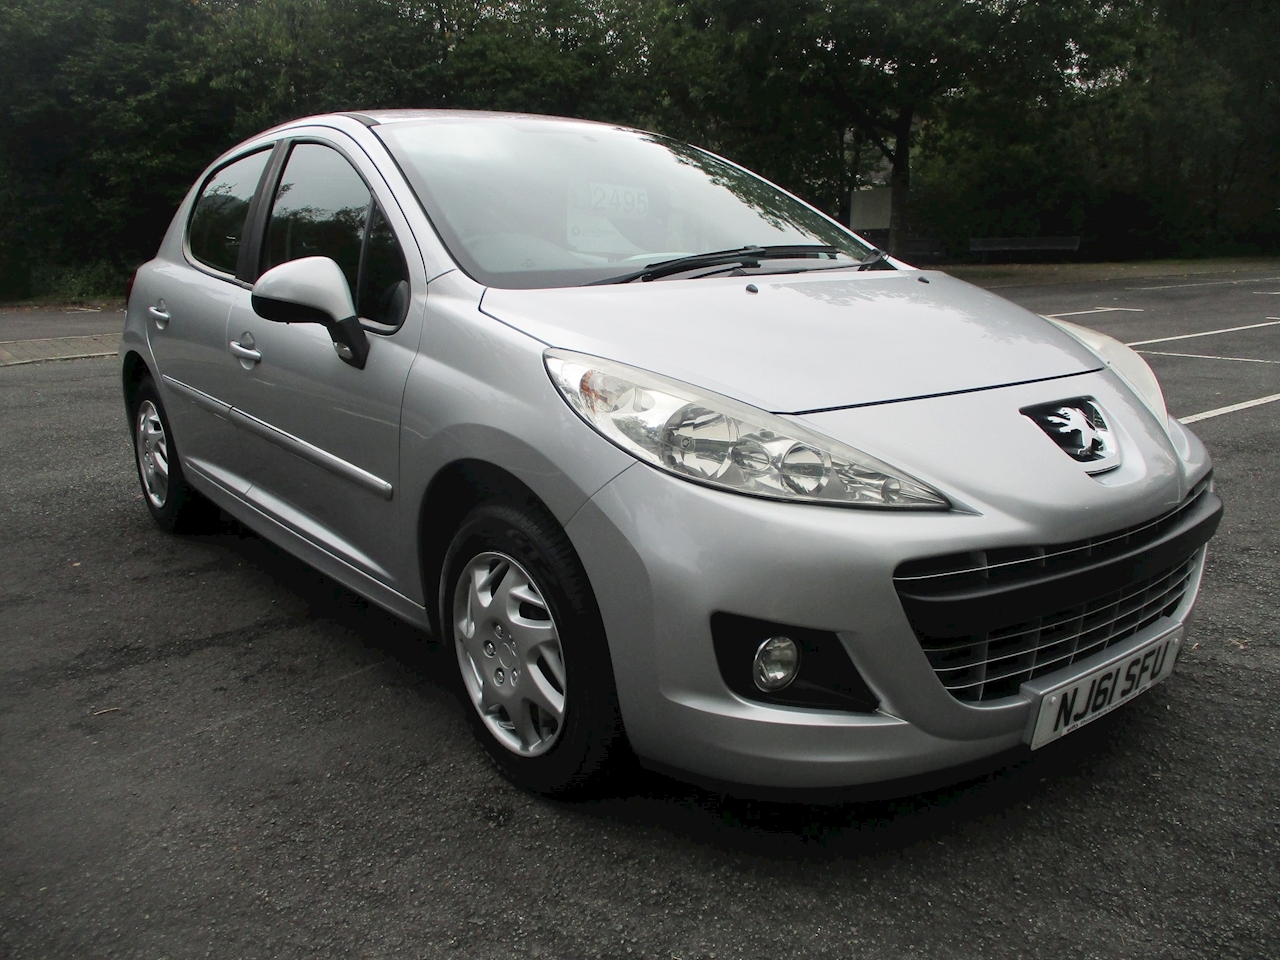 Used Peugeot 207 sw 1.6 HDi Allure Euro 5 5dr 2012 5dr Manual (FD12ORZ)